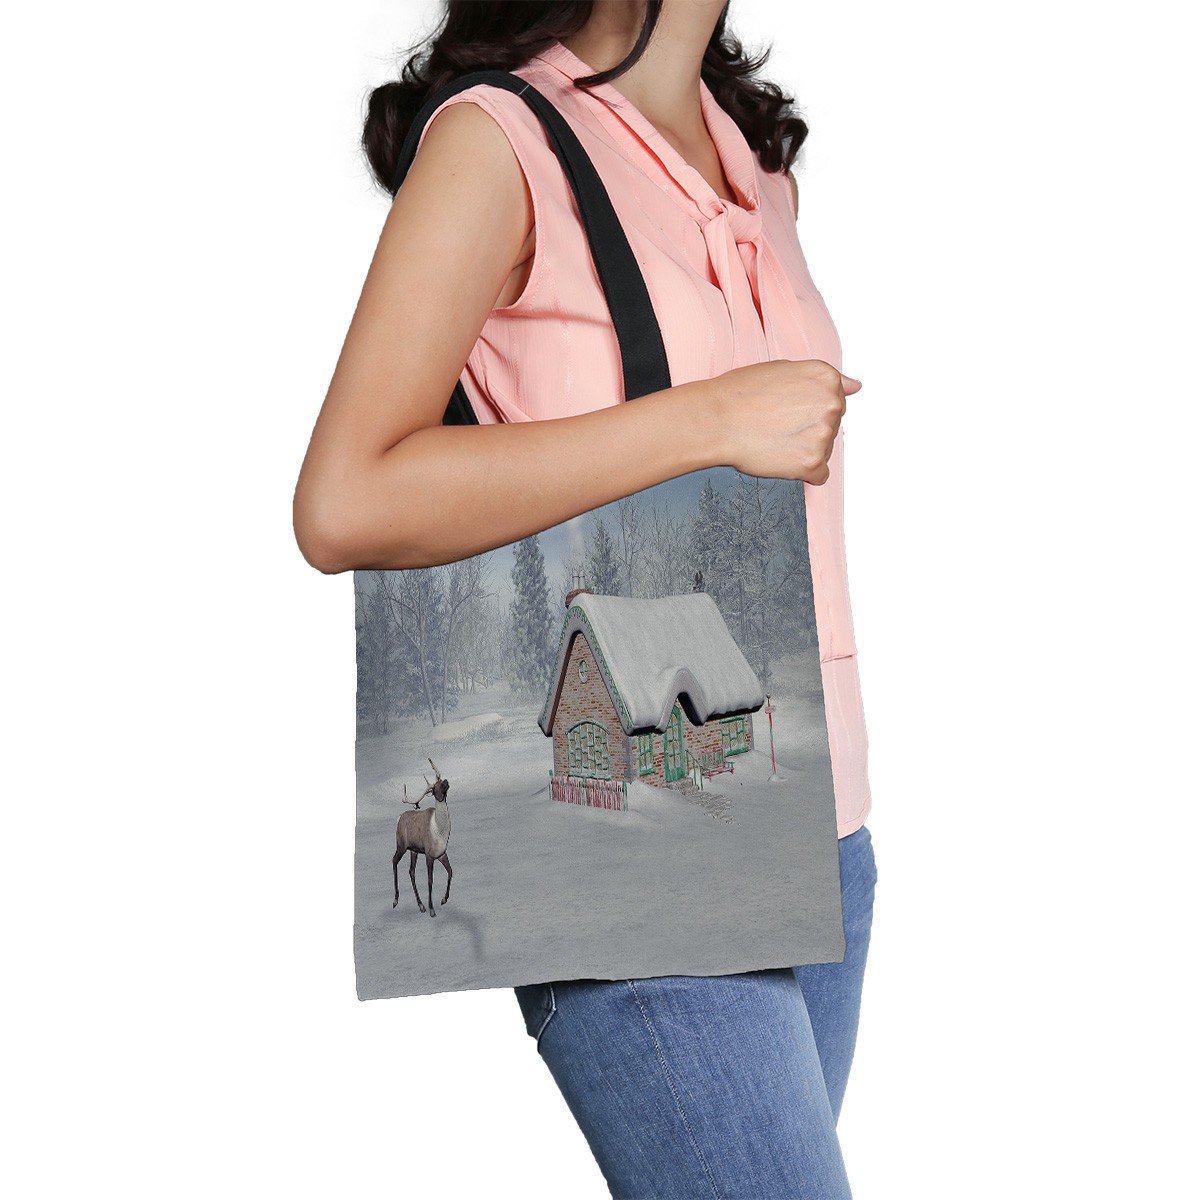 ECZJNT Winter Wonderland Christmas Canvas Bag Reusable Tote Grocery Shopping Bags Tote Bag 14"(W) x 16"(H) - image 1 of 2